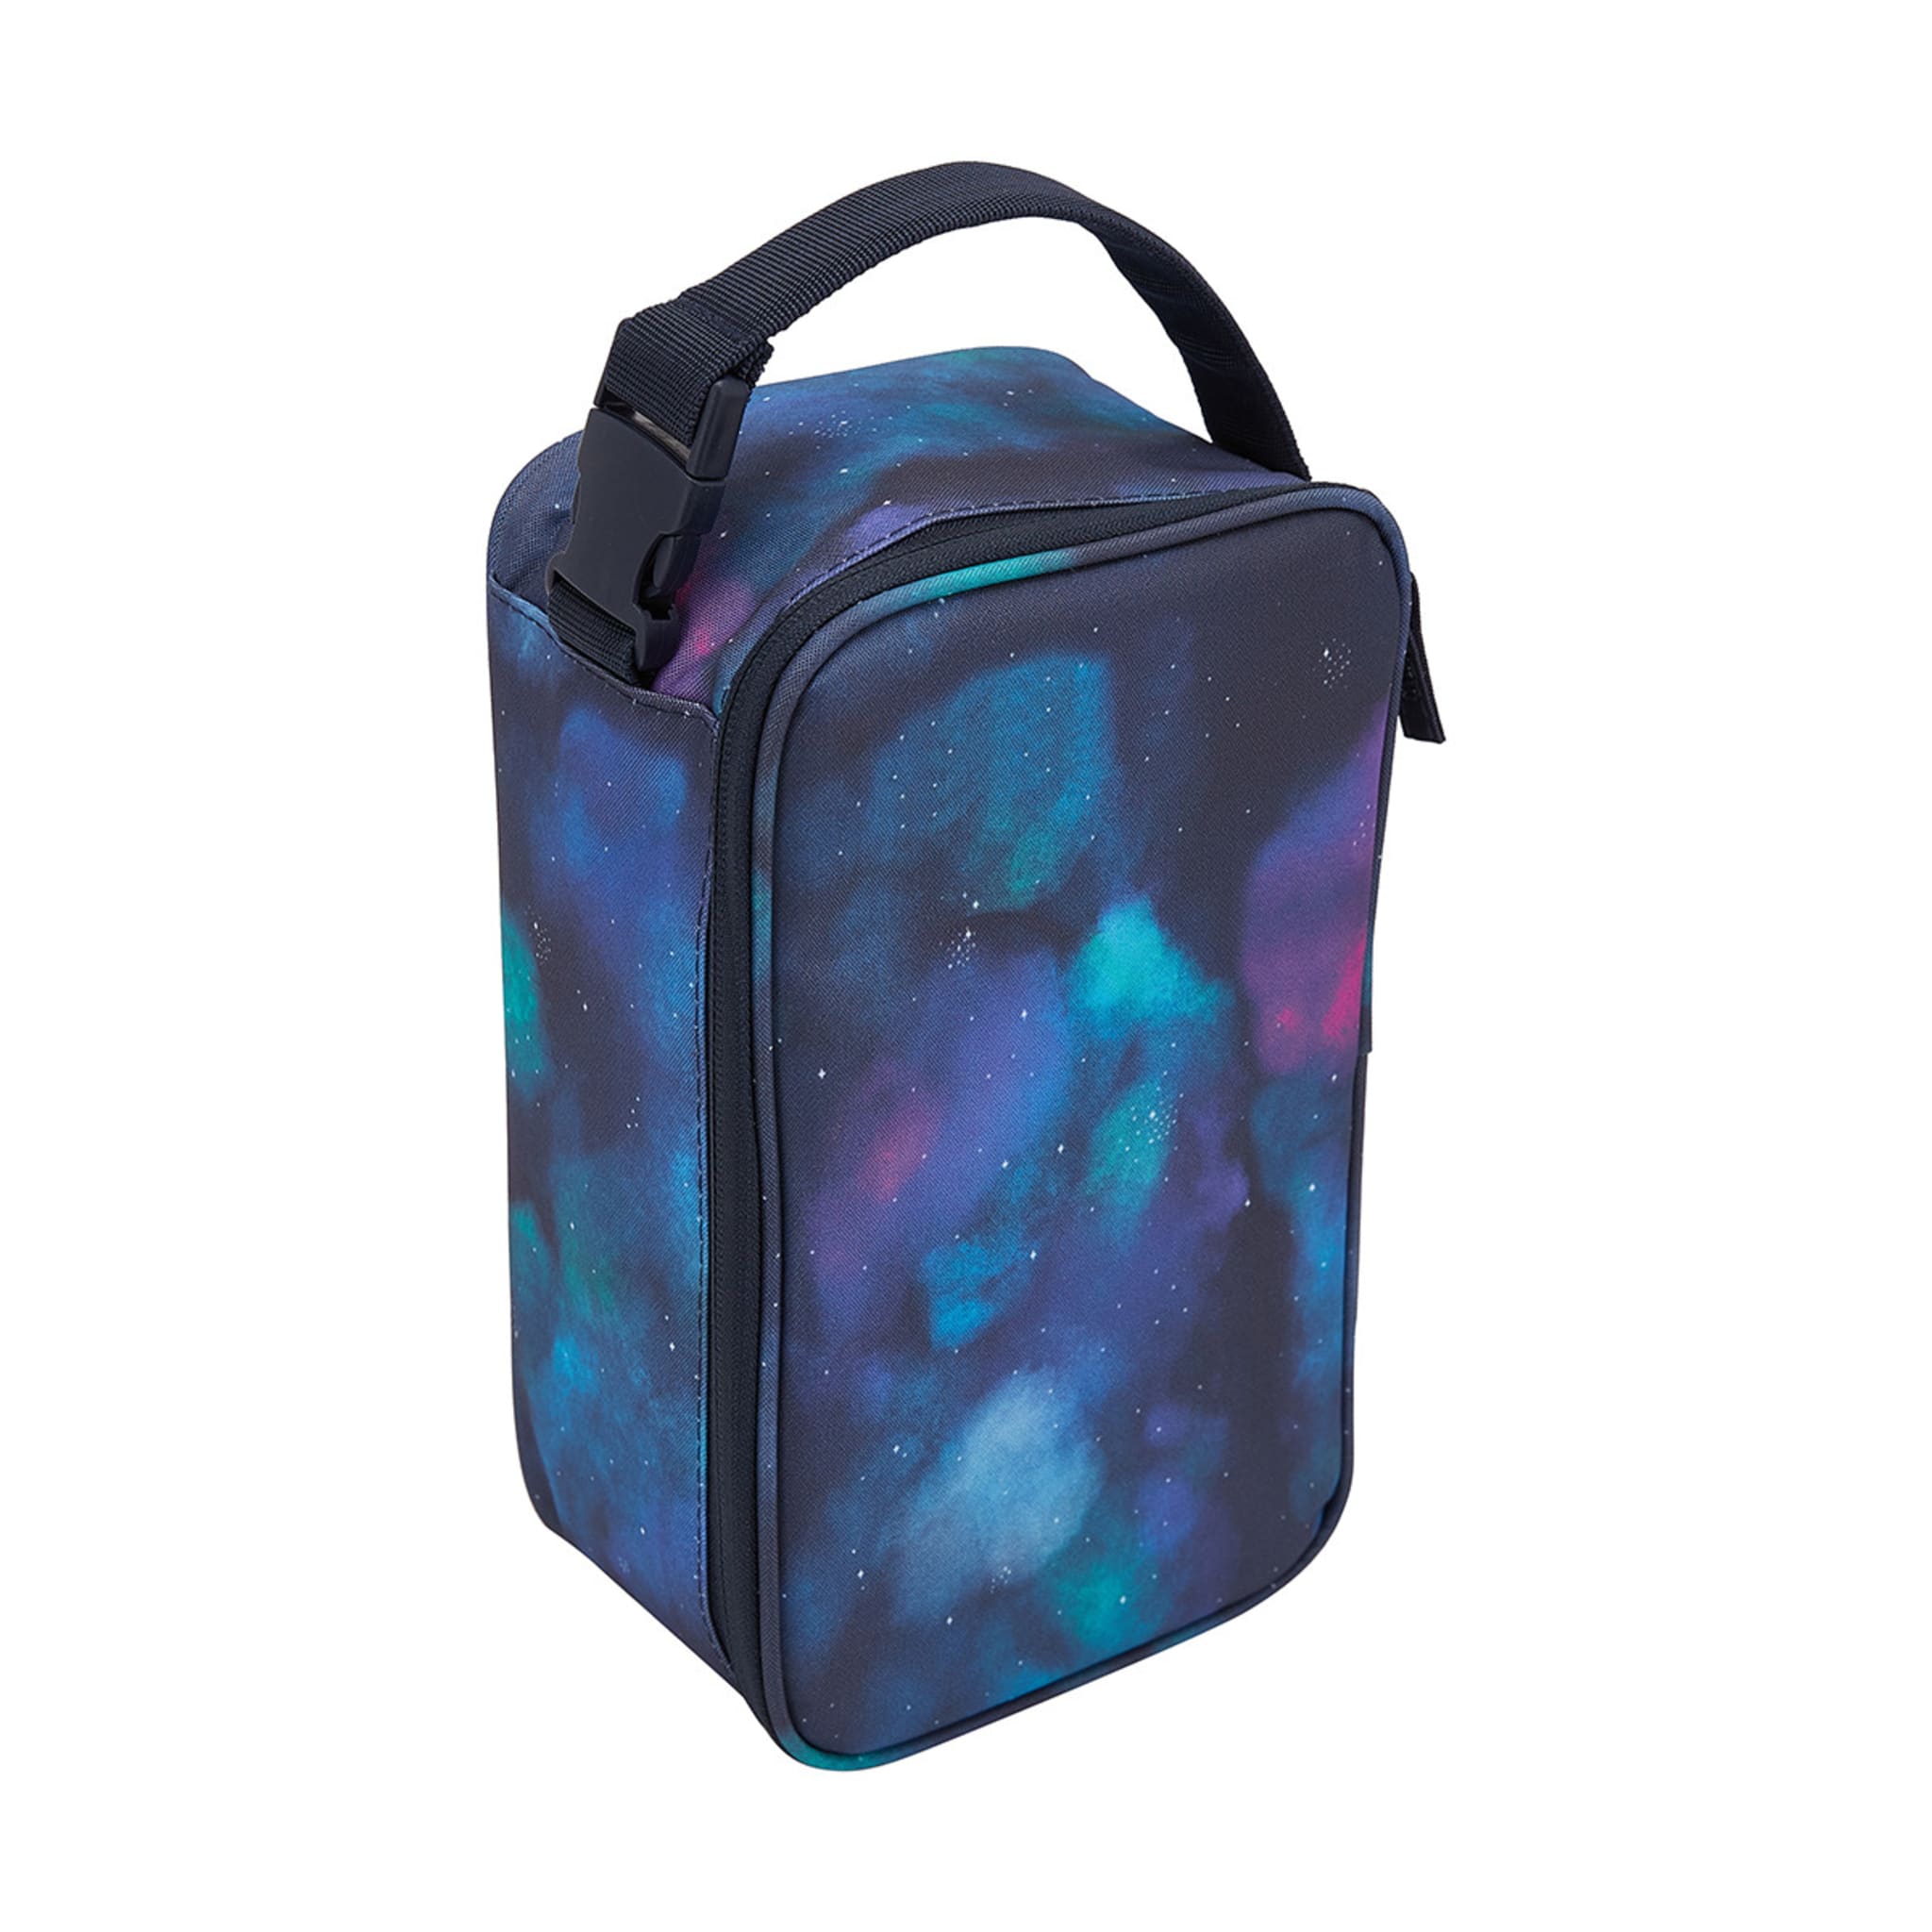 Galaxy Insulated Cold Box Lunch Bag - Kmart